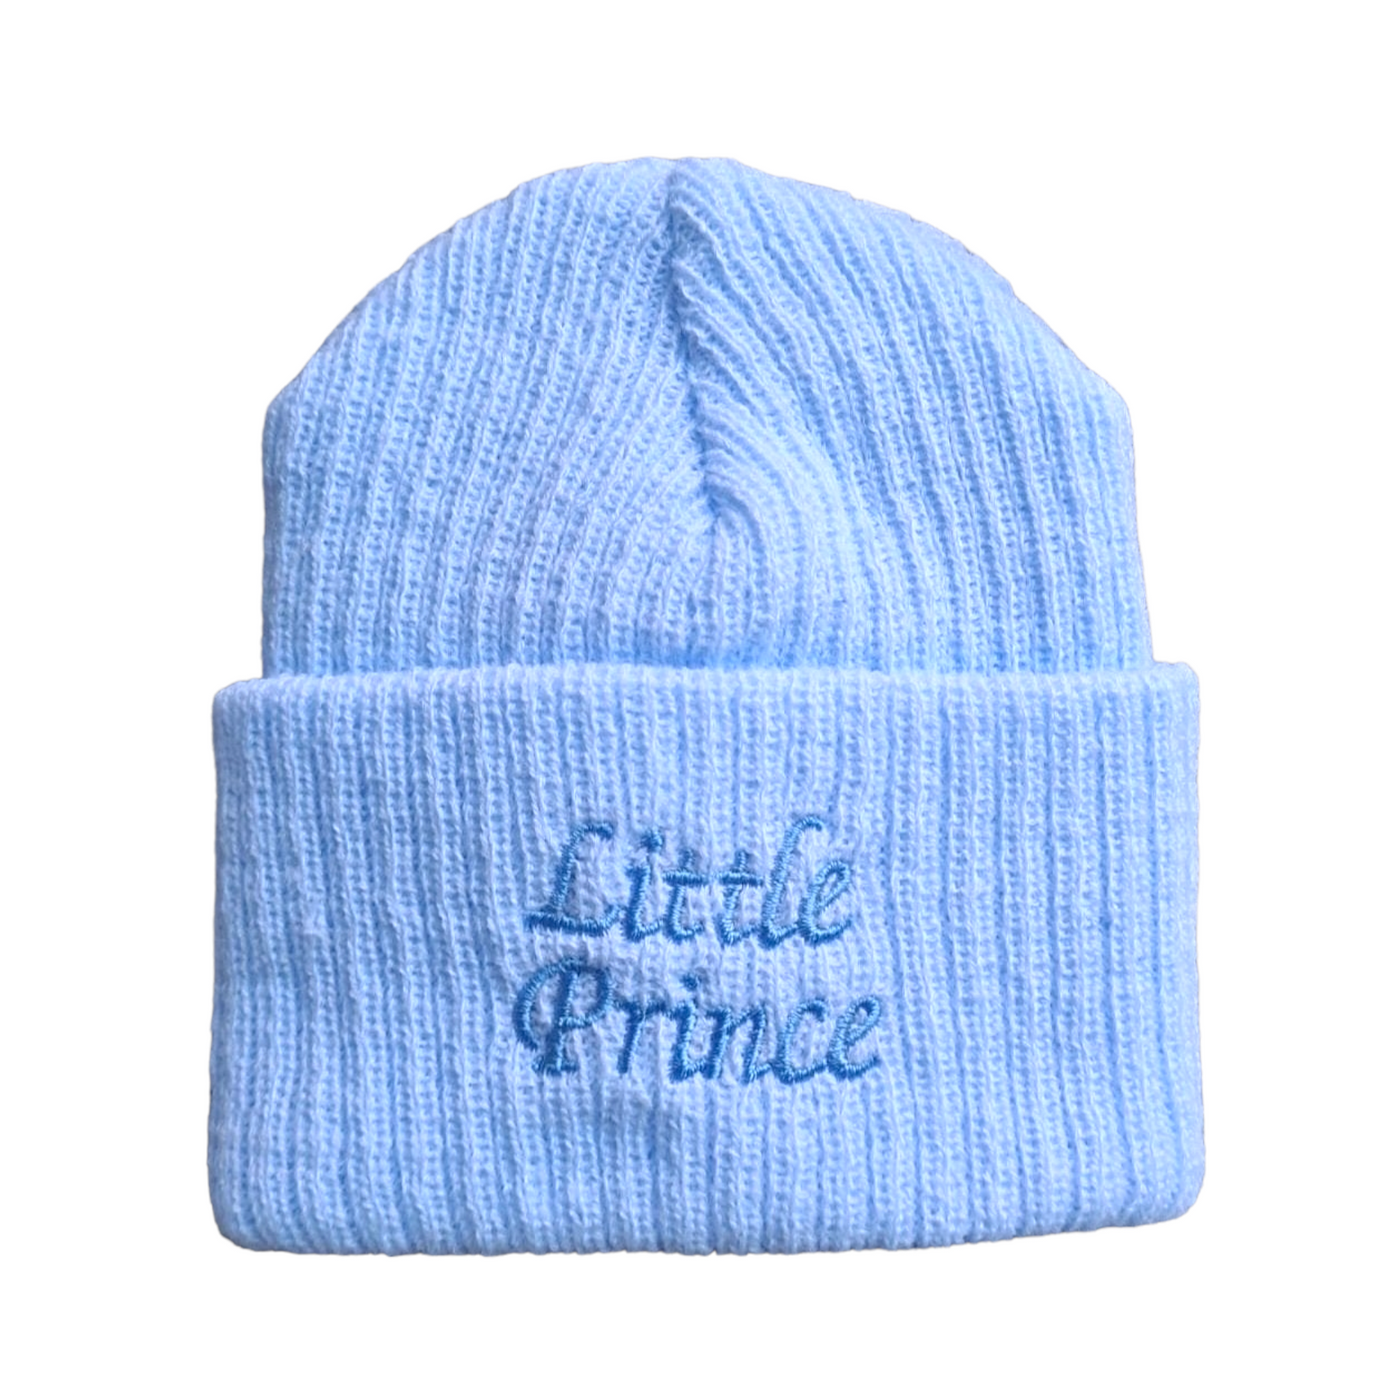 Blue Little Prince Baby Hat